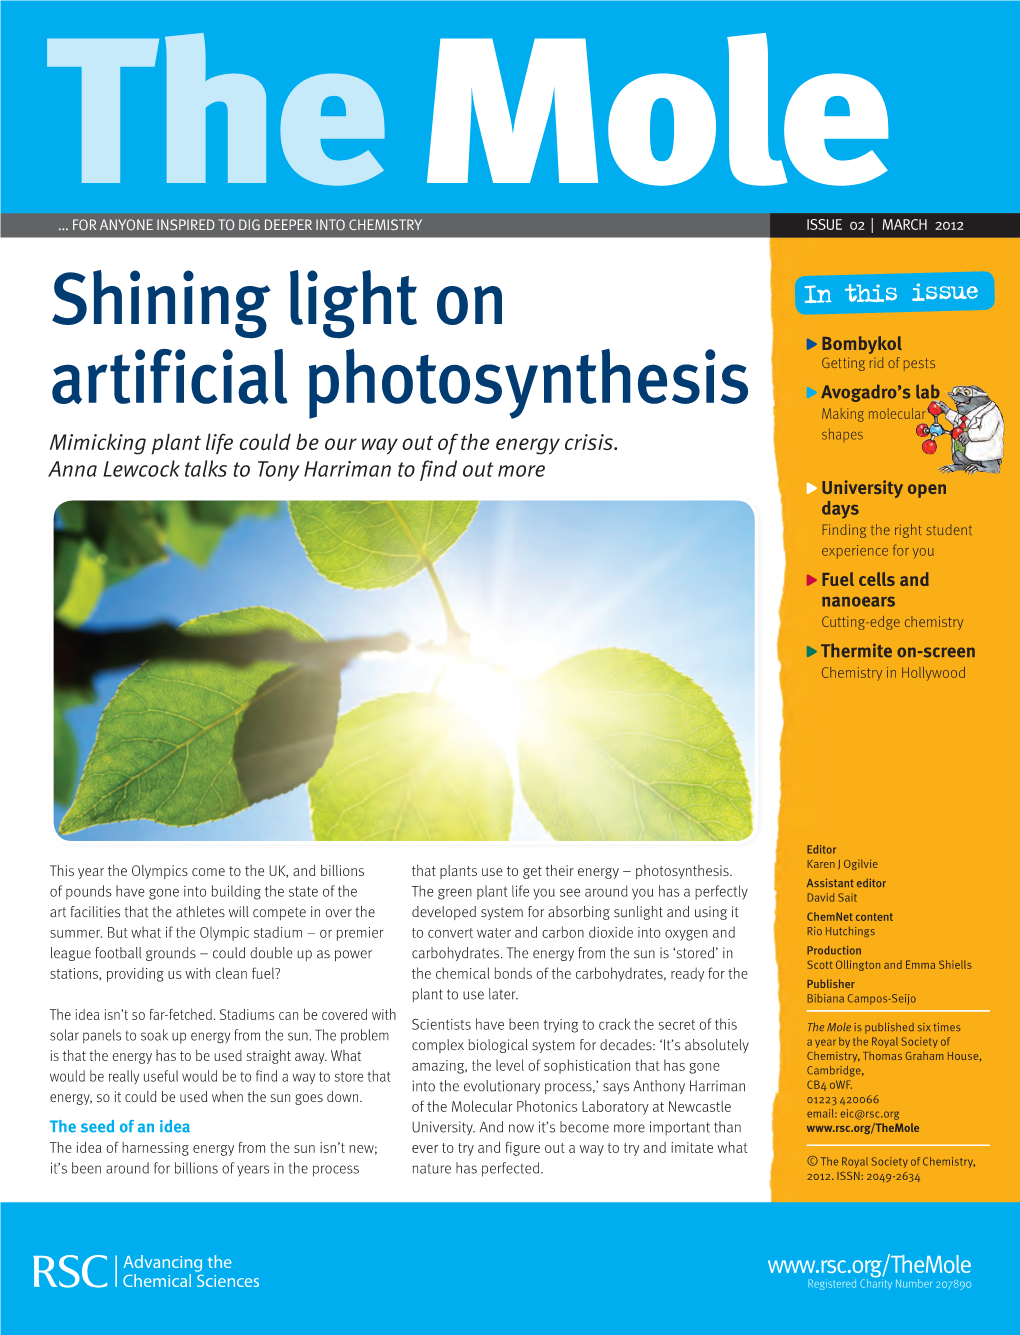 Shining Light on Artificial Photosynthesis